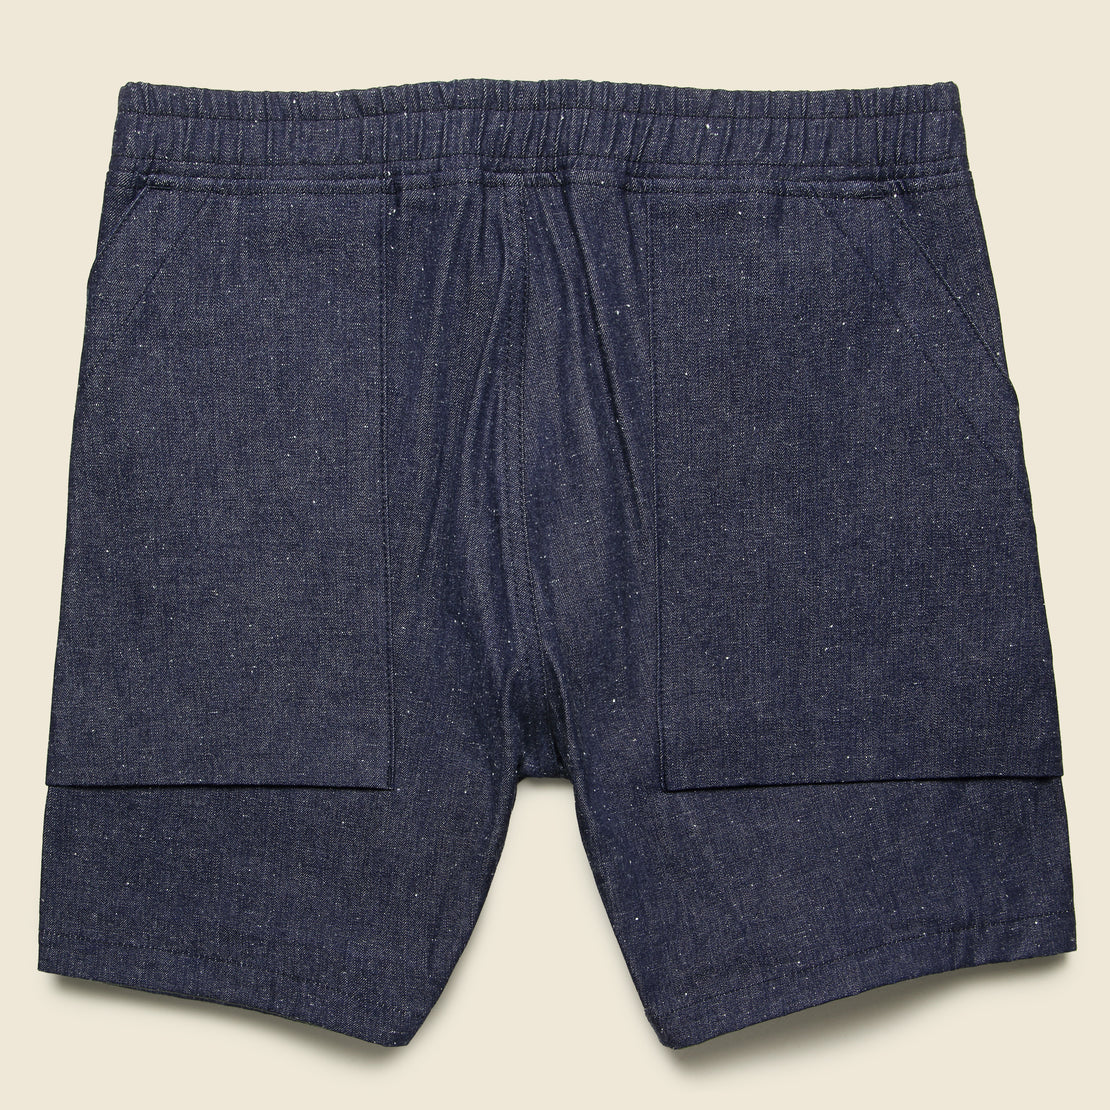 Fatigue Short - Neppy Indigo - Rogue Territory - STAG Provisions - Shorts - Solid